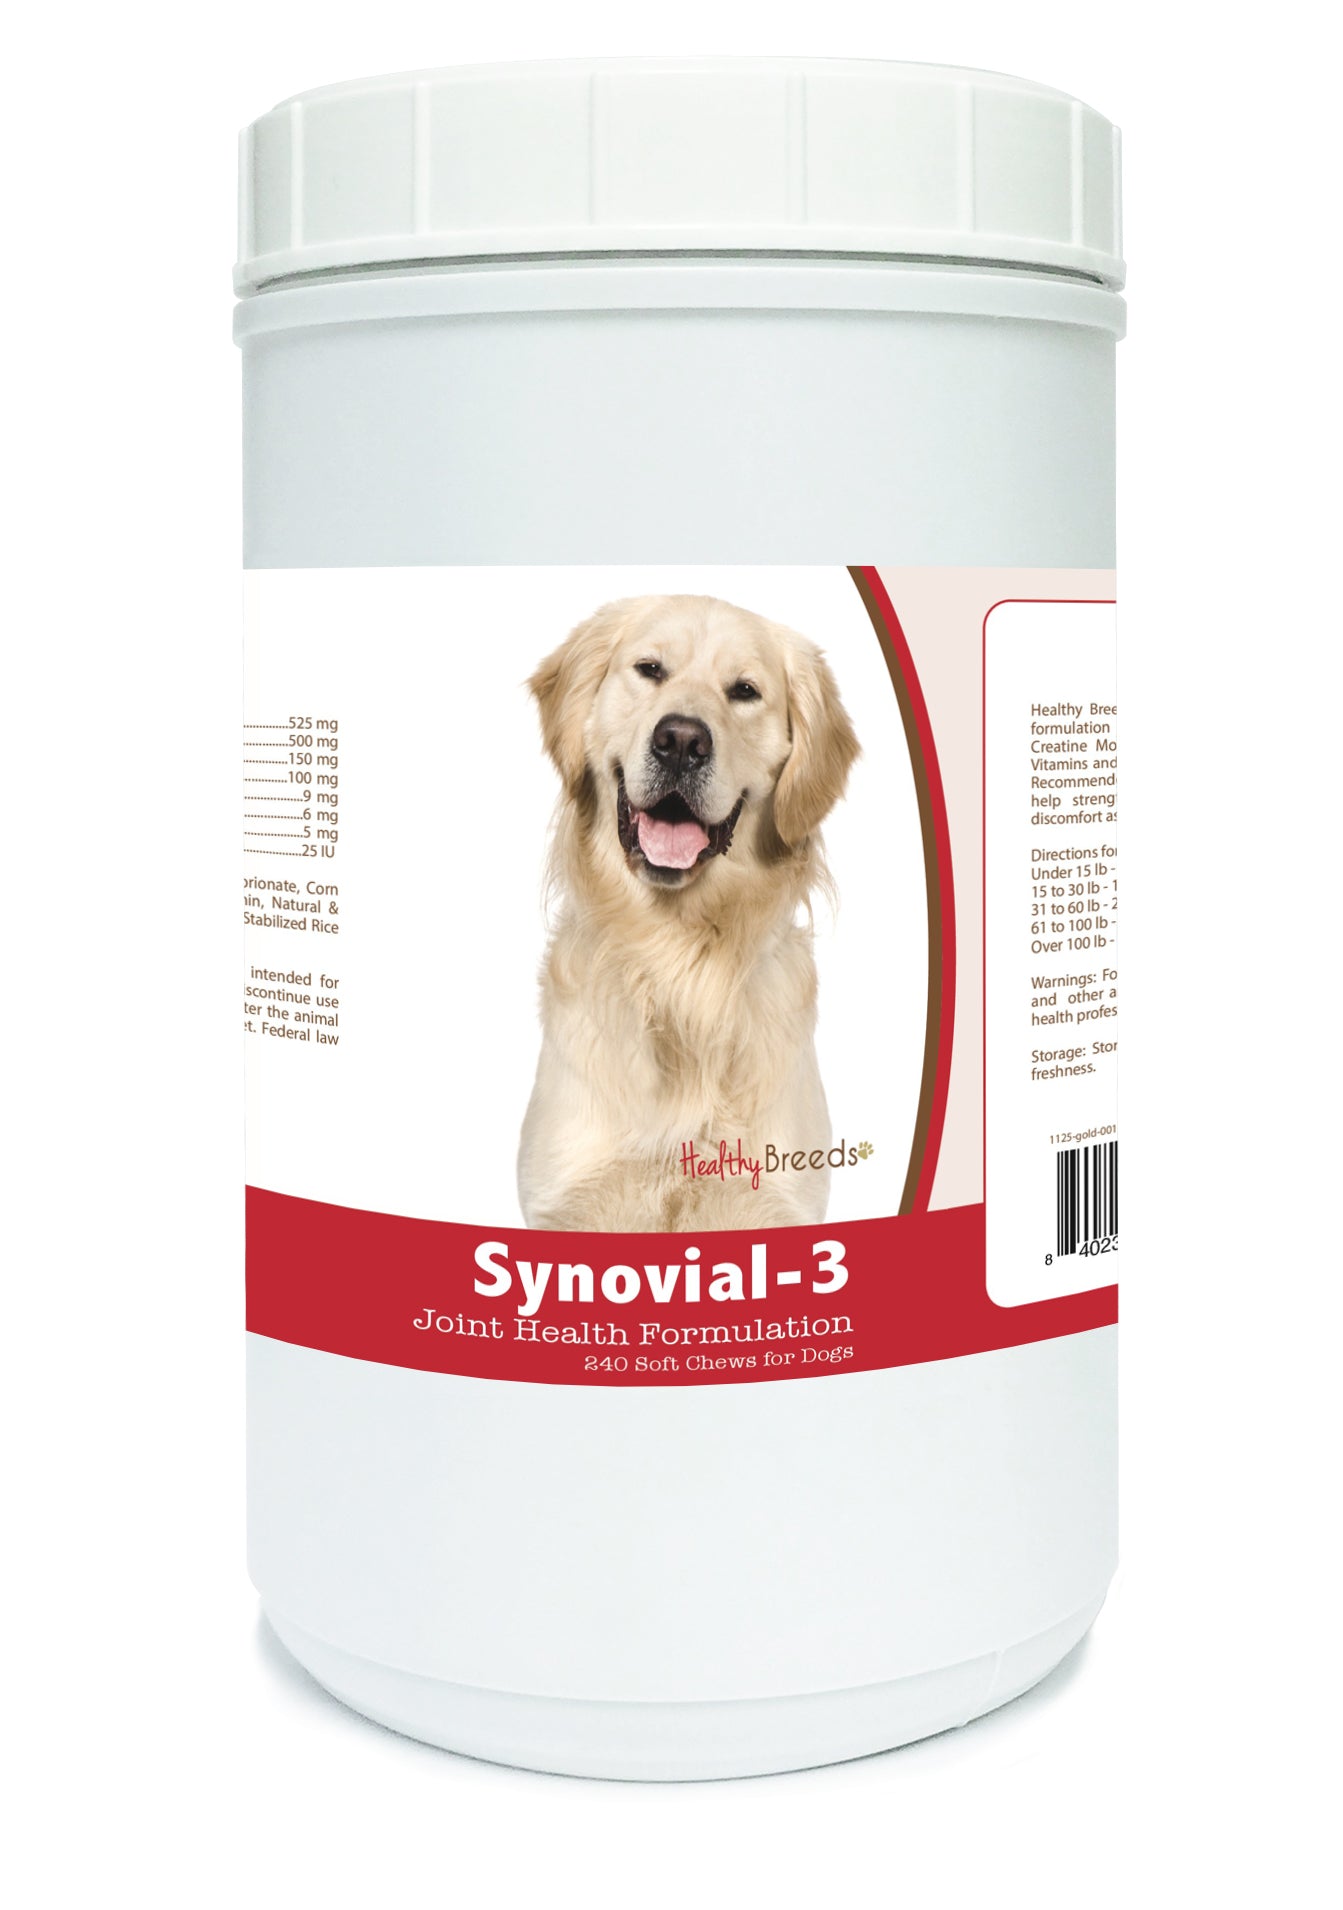 Golden Retriever Synovial-3 Joint Health Formulation Soft Chews 240 Count